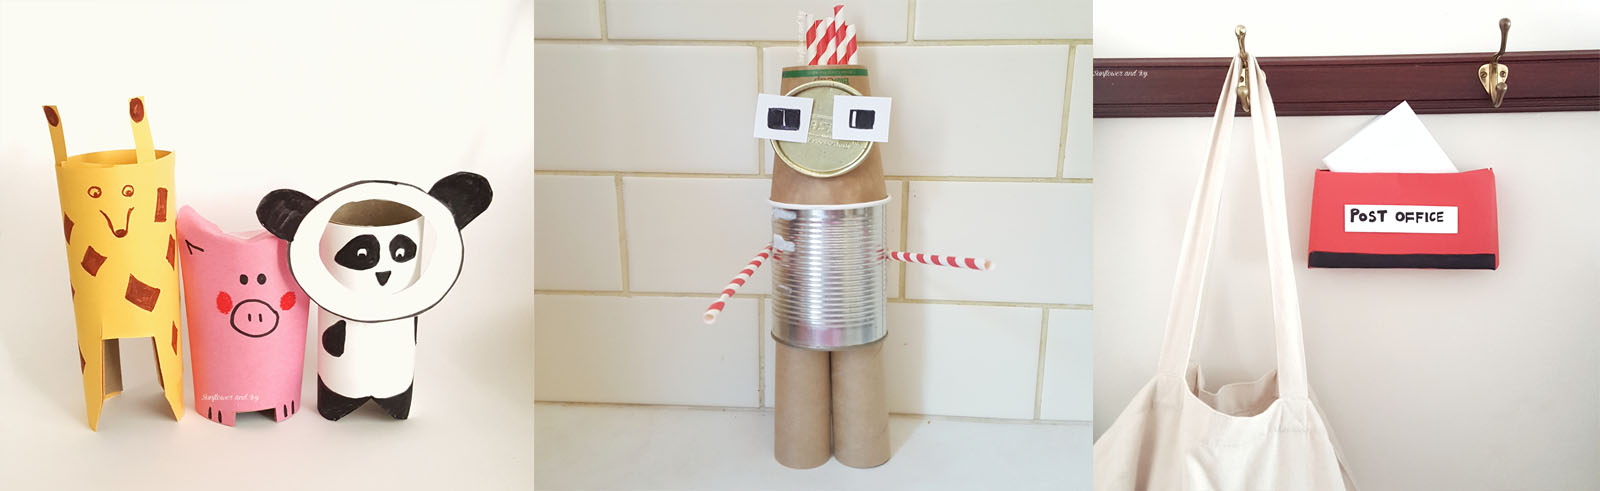 recycling art toilet roll animals and recycled robots